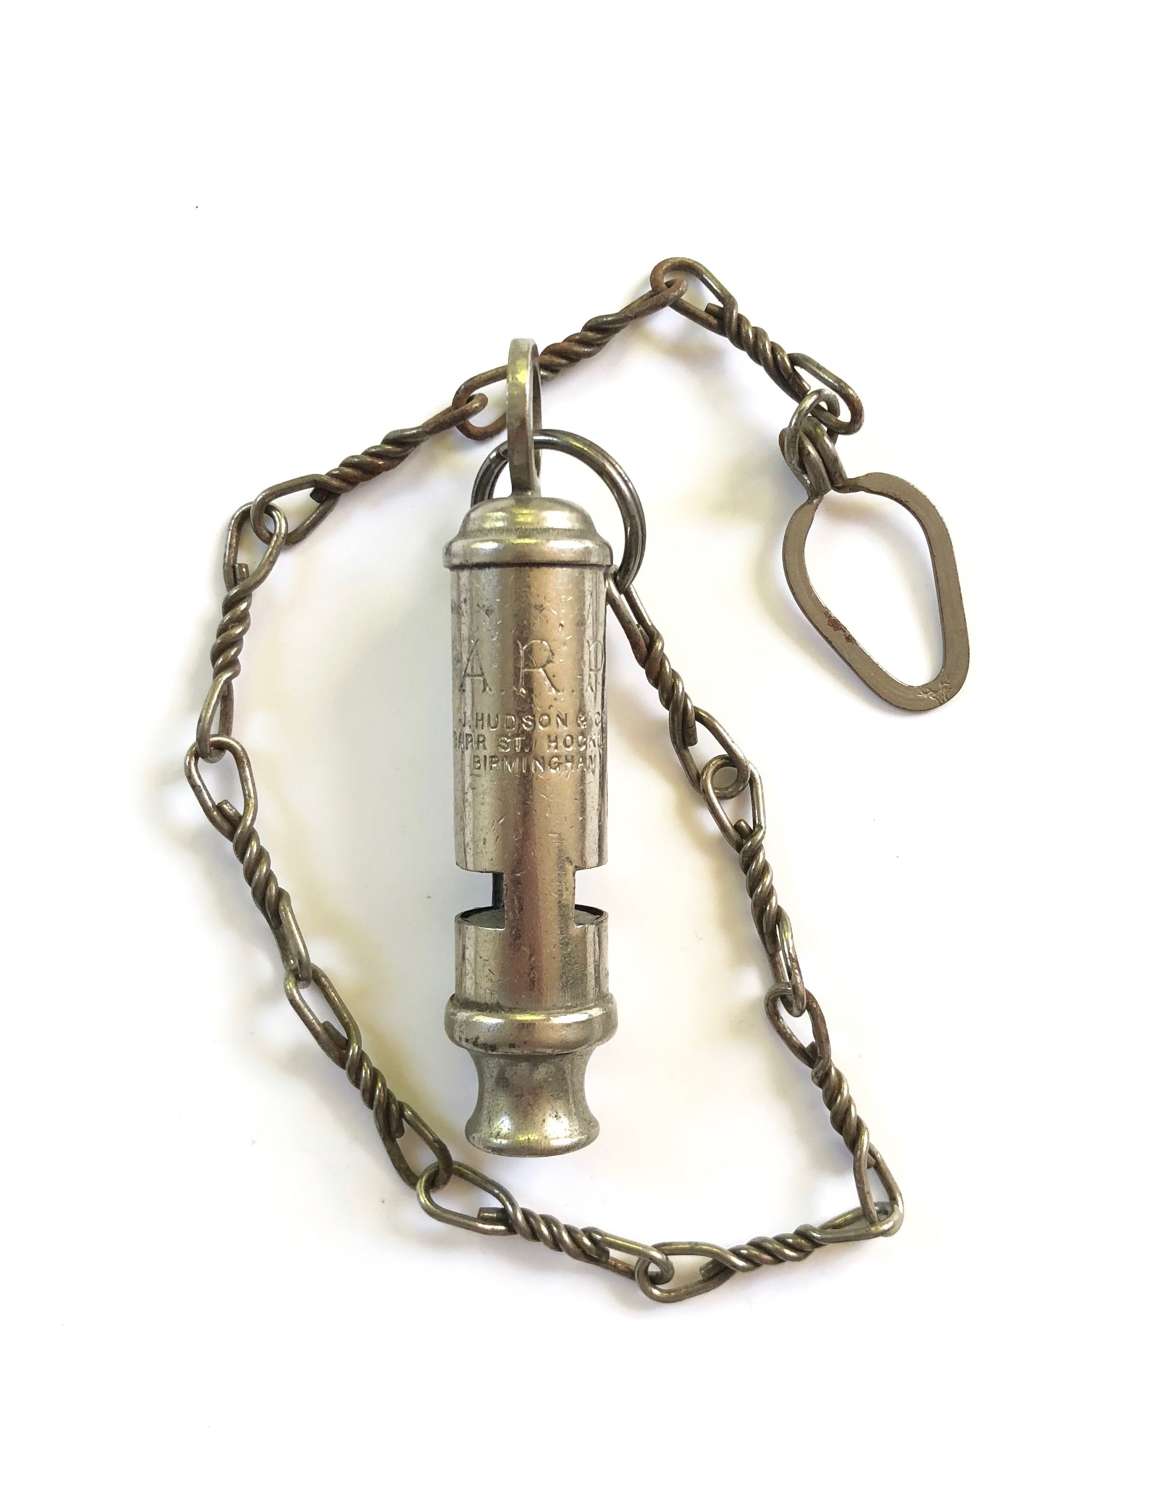 WW2 Home Front ARP Whistle & Chain.